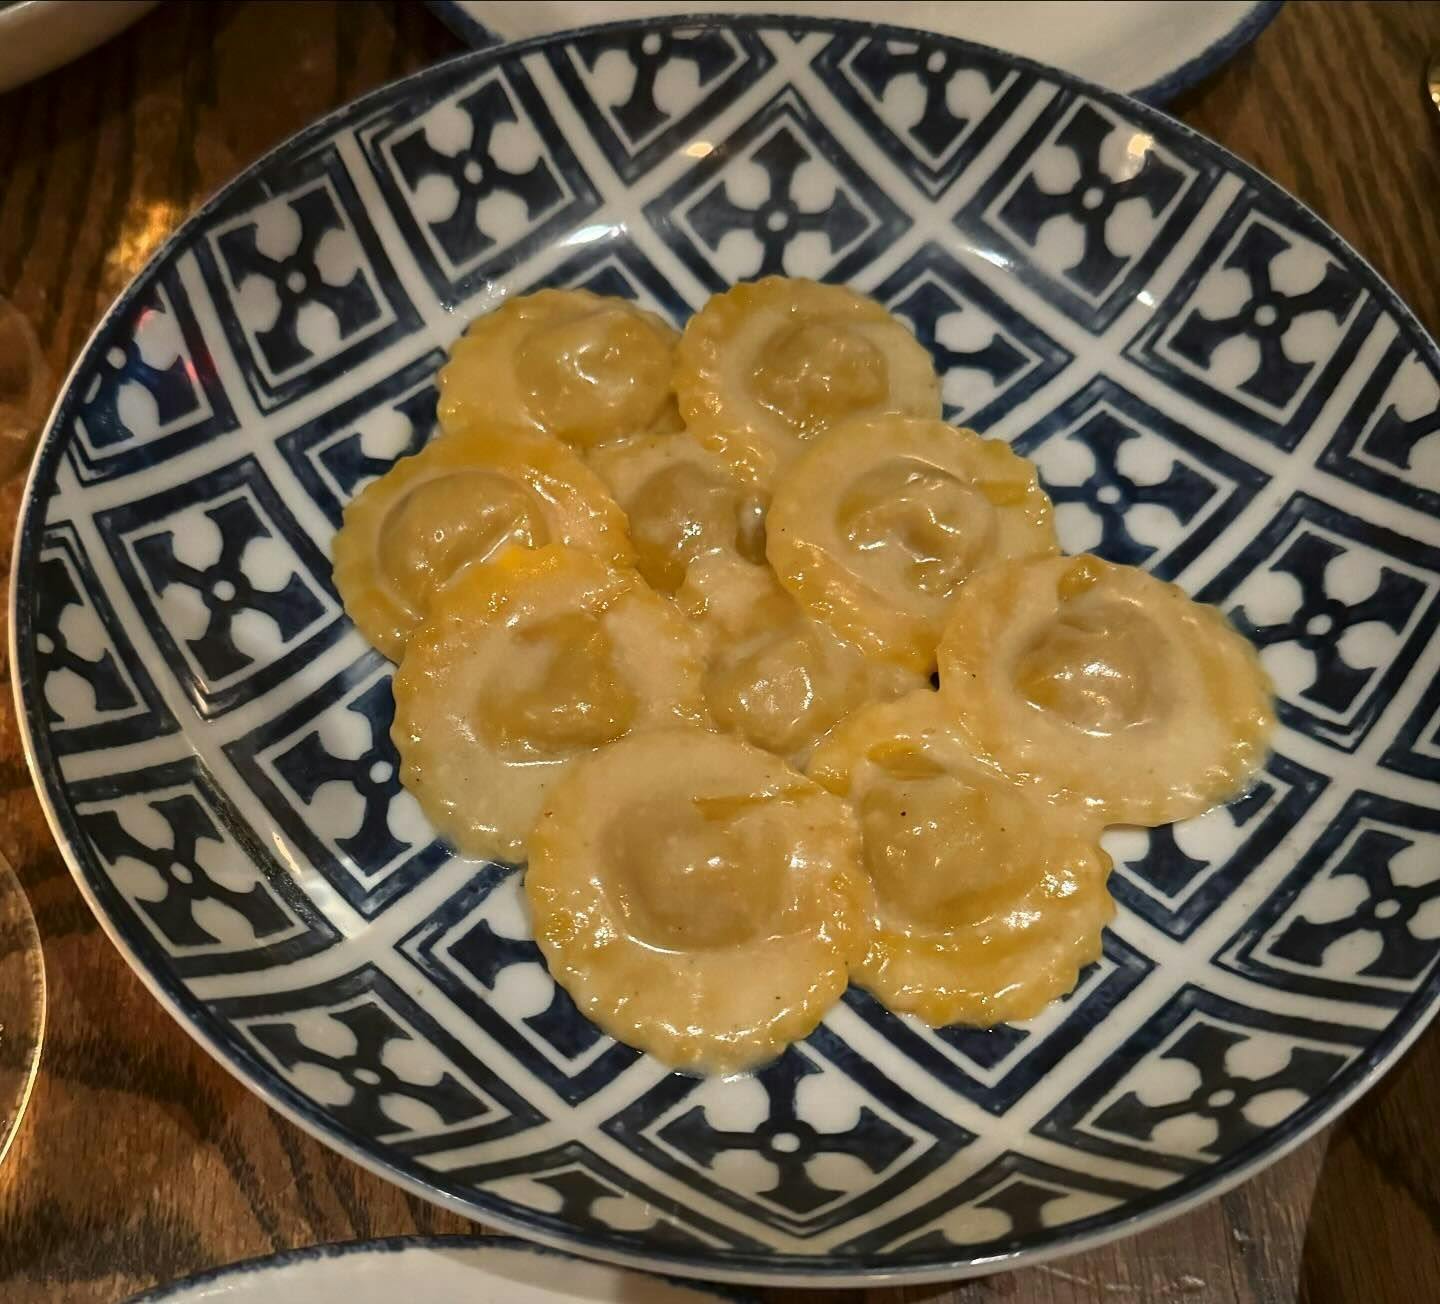 Delicate stuffed pasta served on an ornate blue and white patterned plate, showcasing the art of Italian cuisine available for booking at New York's finest eateries through Booked.